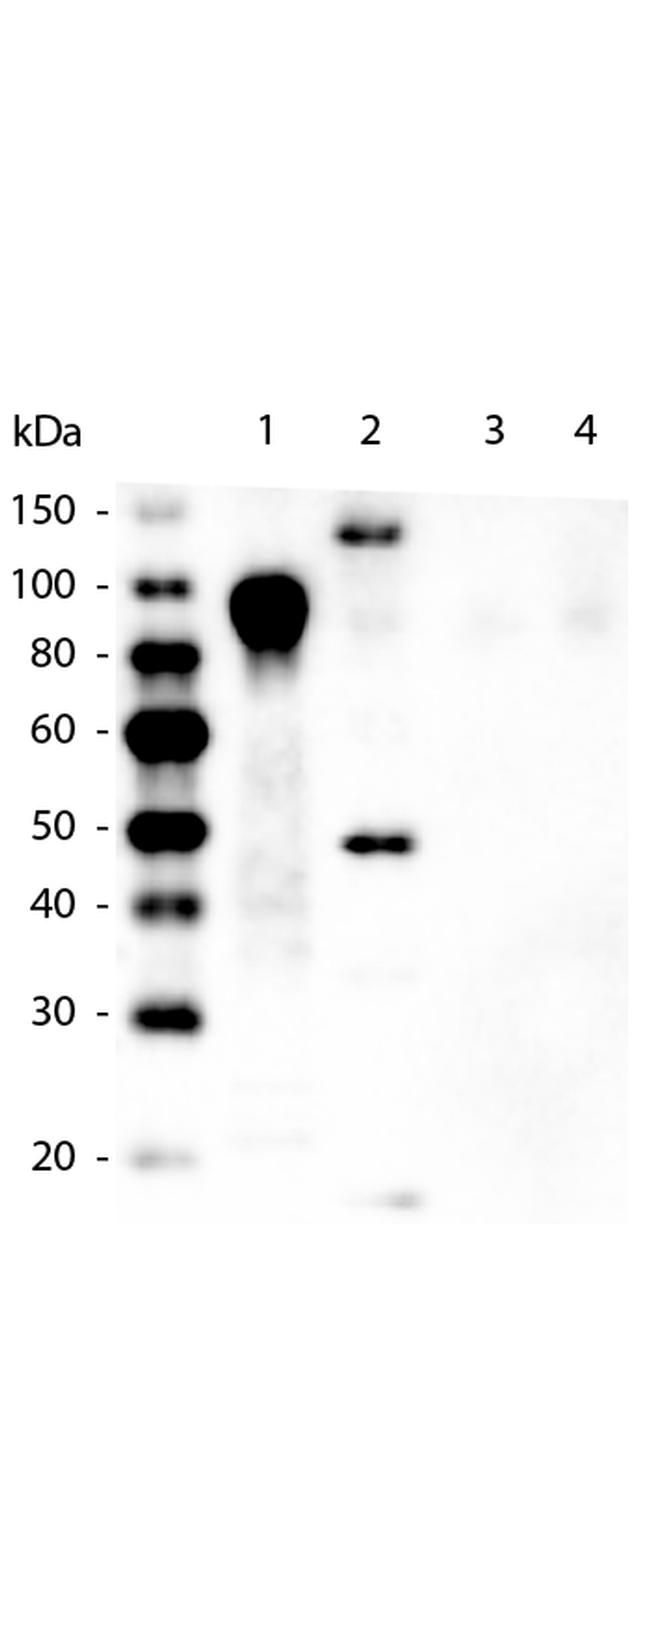 6X His Epitope Tag Antibody in Western Blot (WB)